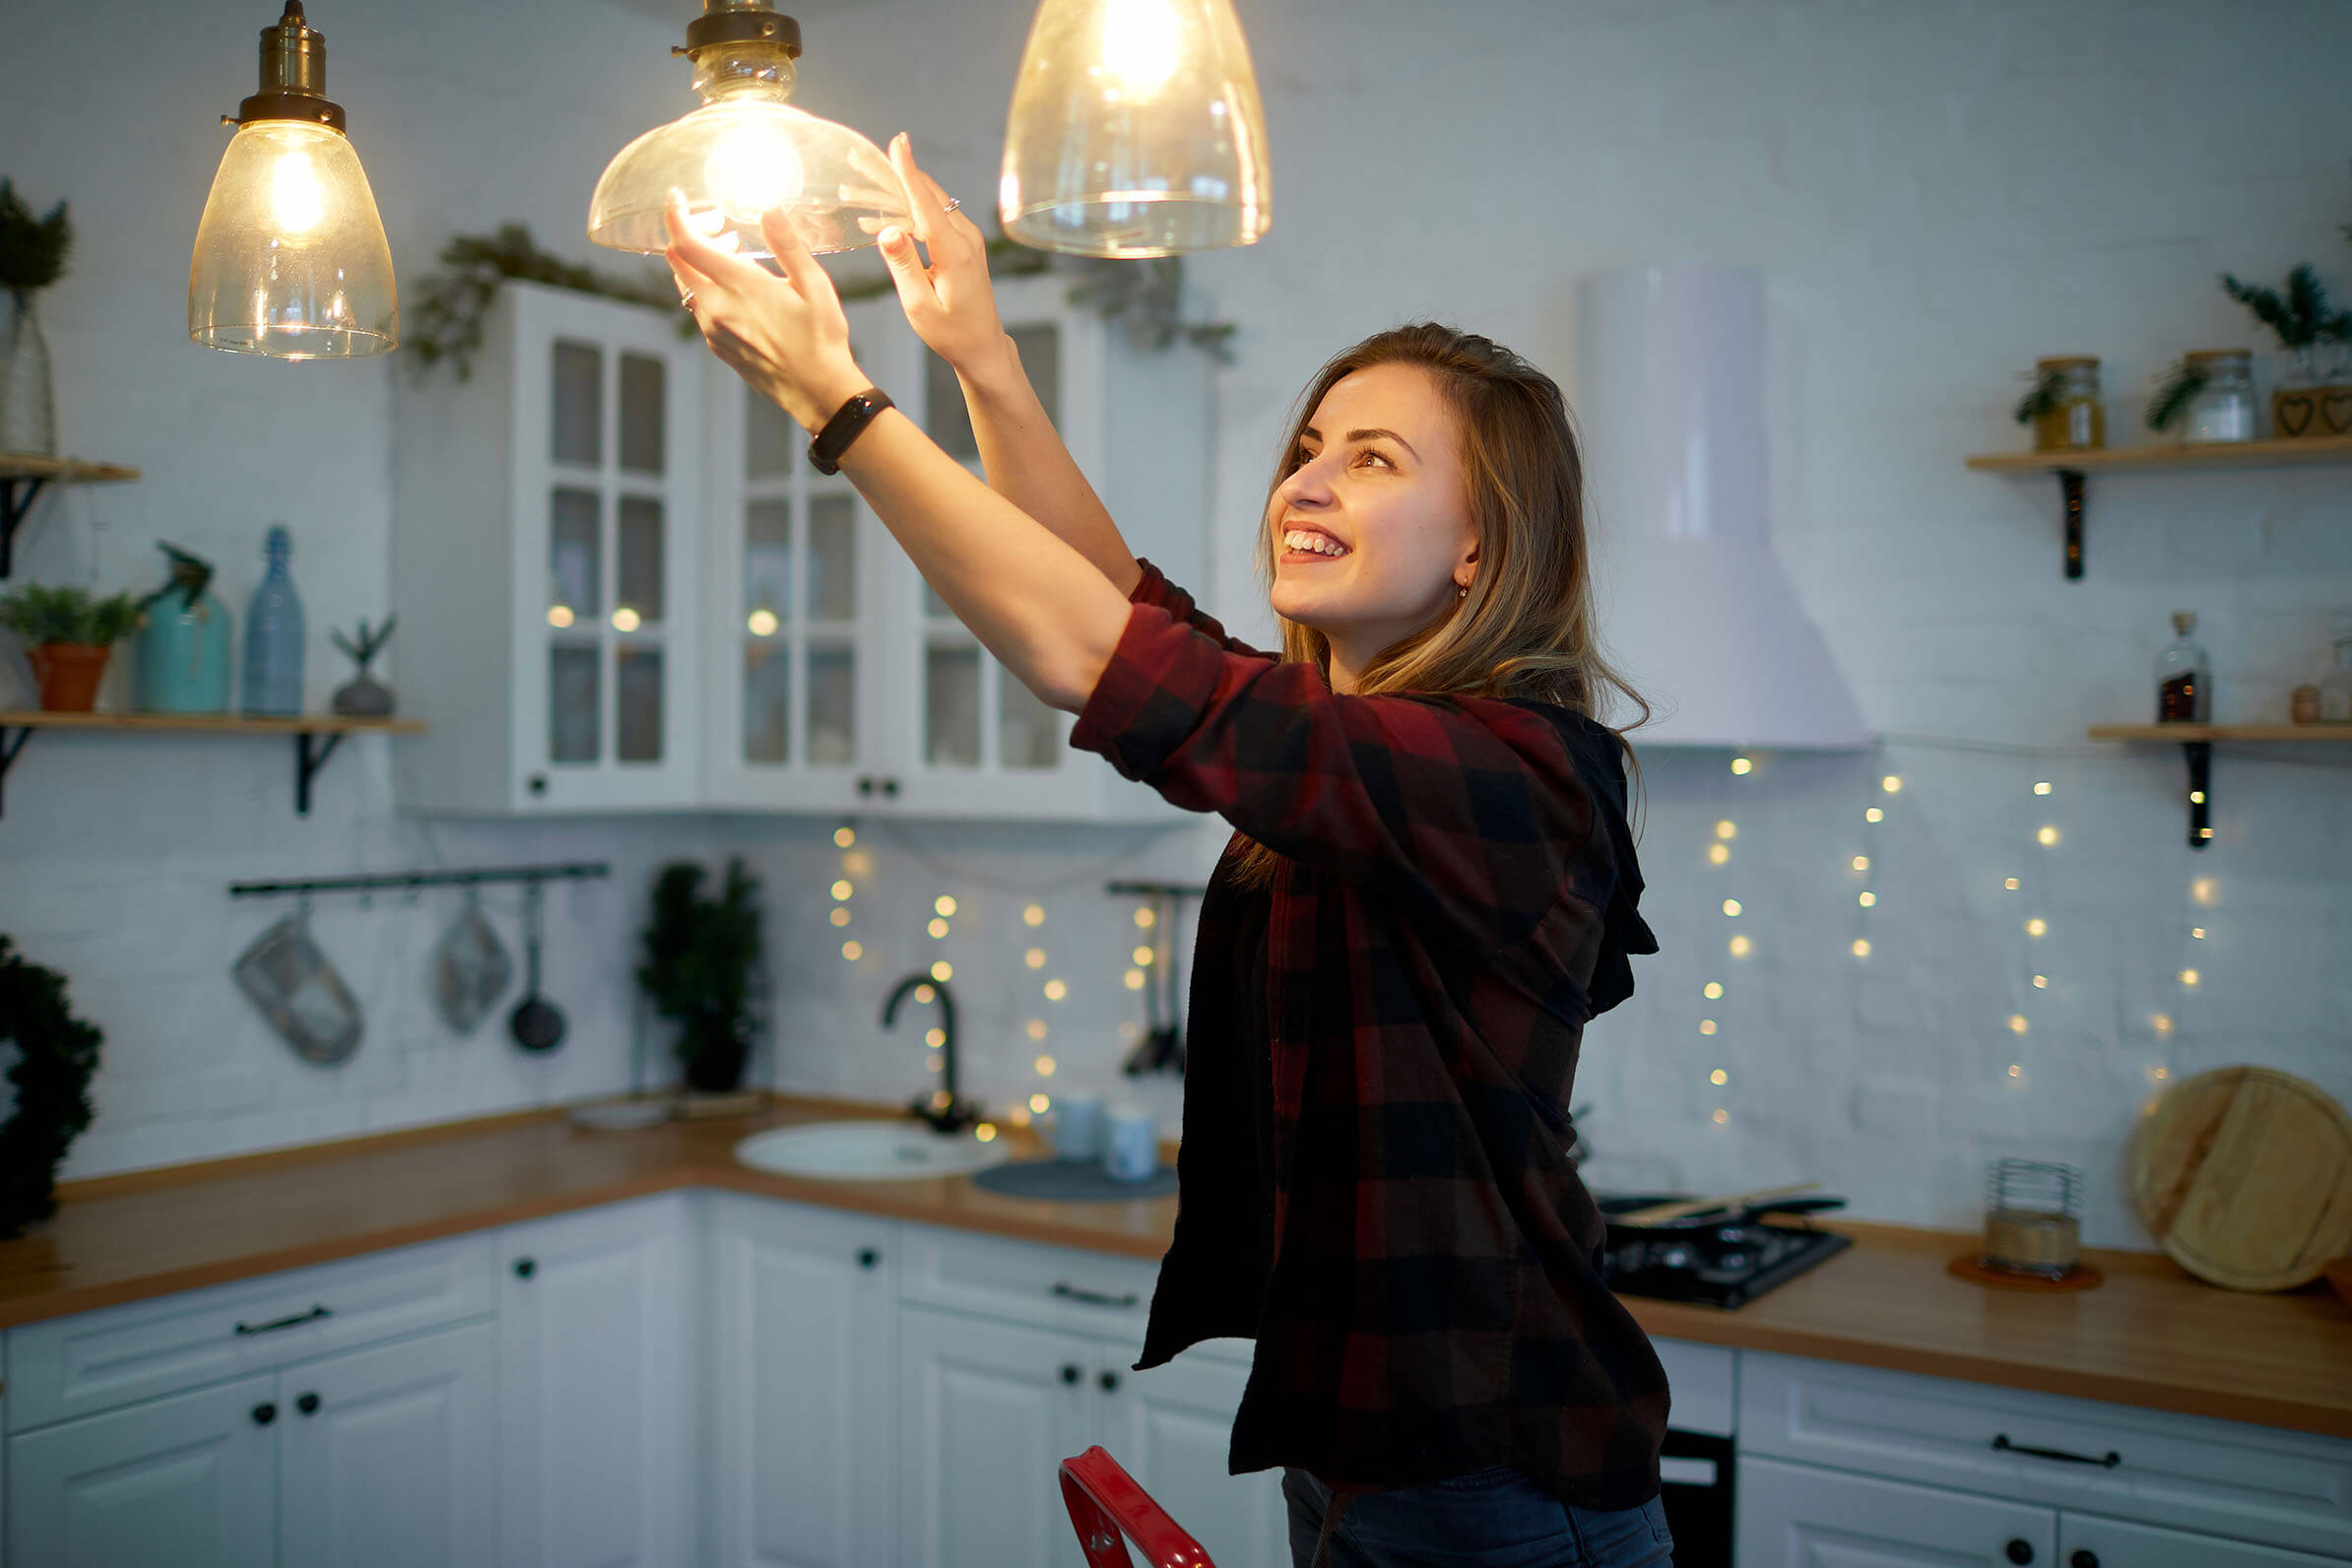 Woman changing a lightbulb in a kitchen